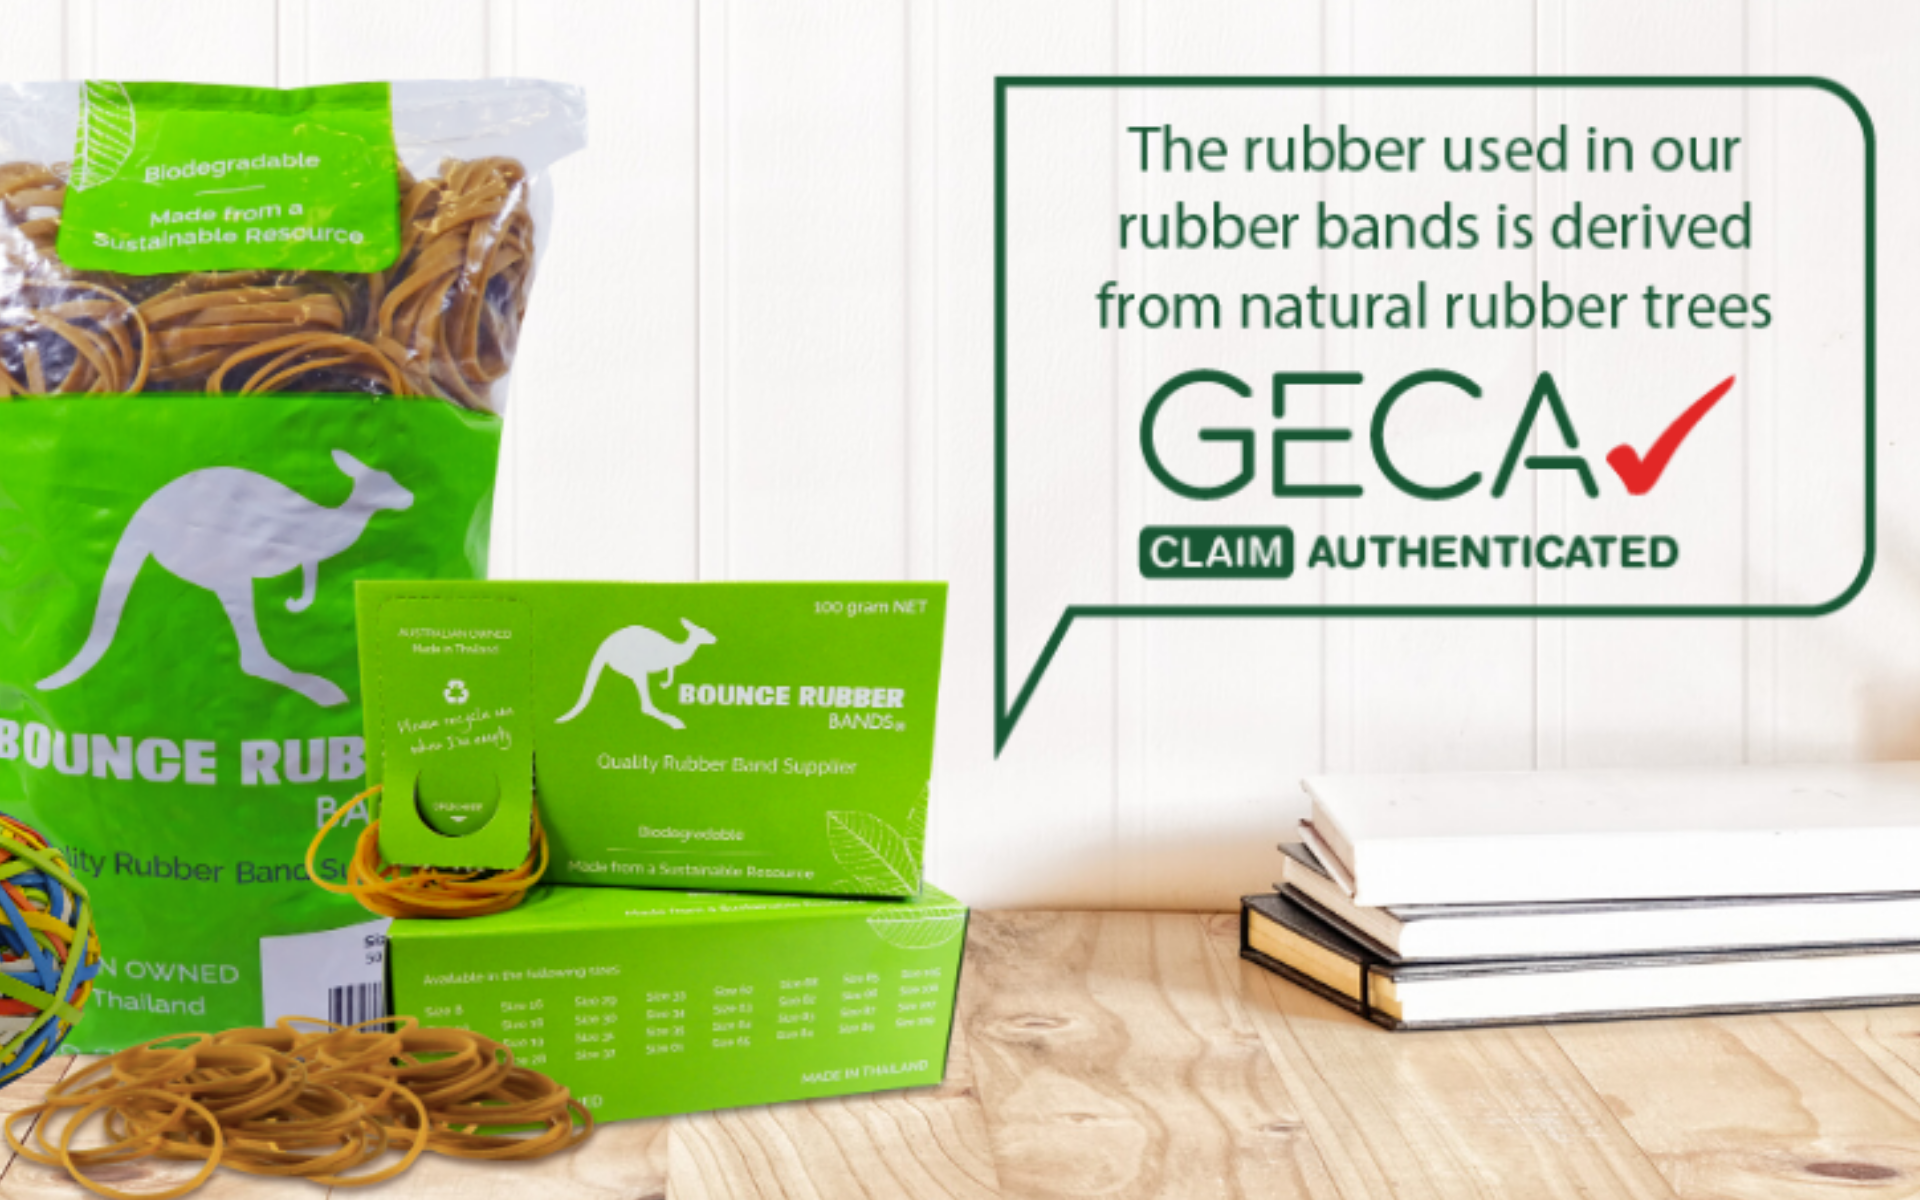 GECA Blog Cover Image for Bounce Rubber Bands